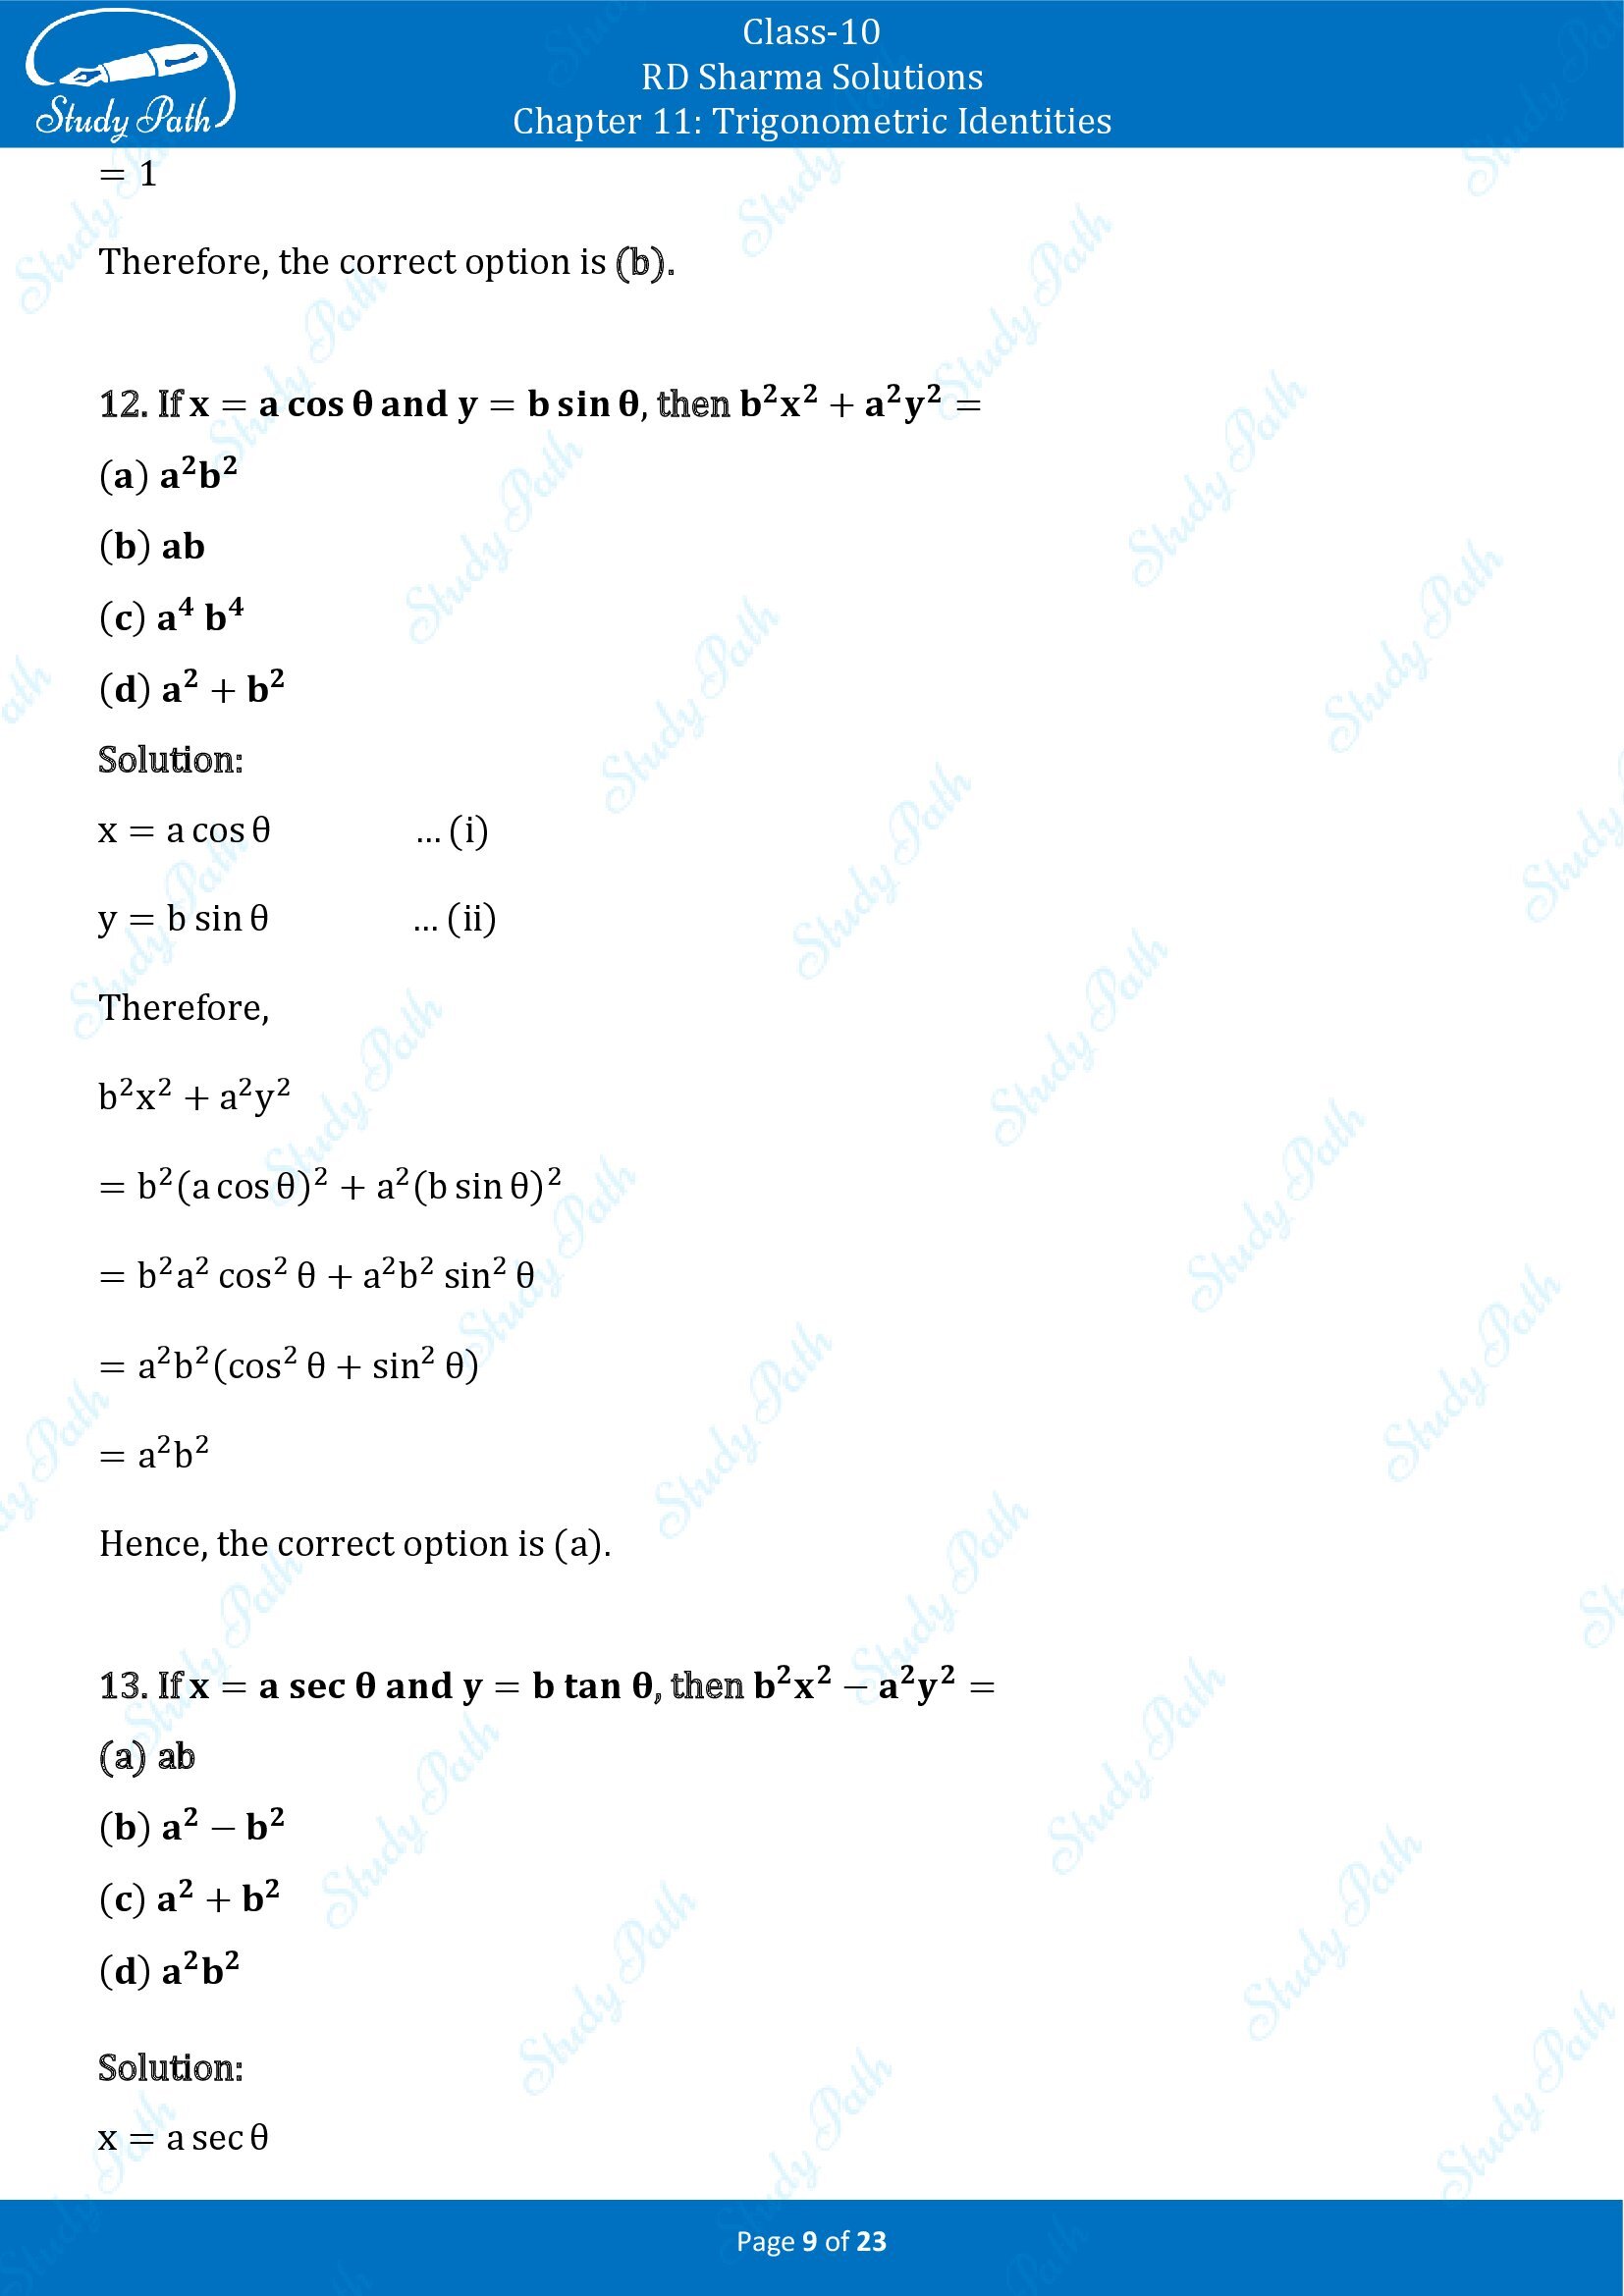 RD Sharma Solutions Class 10 Chapter 11 Trigonometric Identities Multiple Choice Questions MCQs 00009